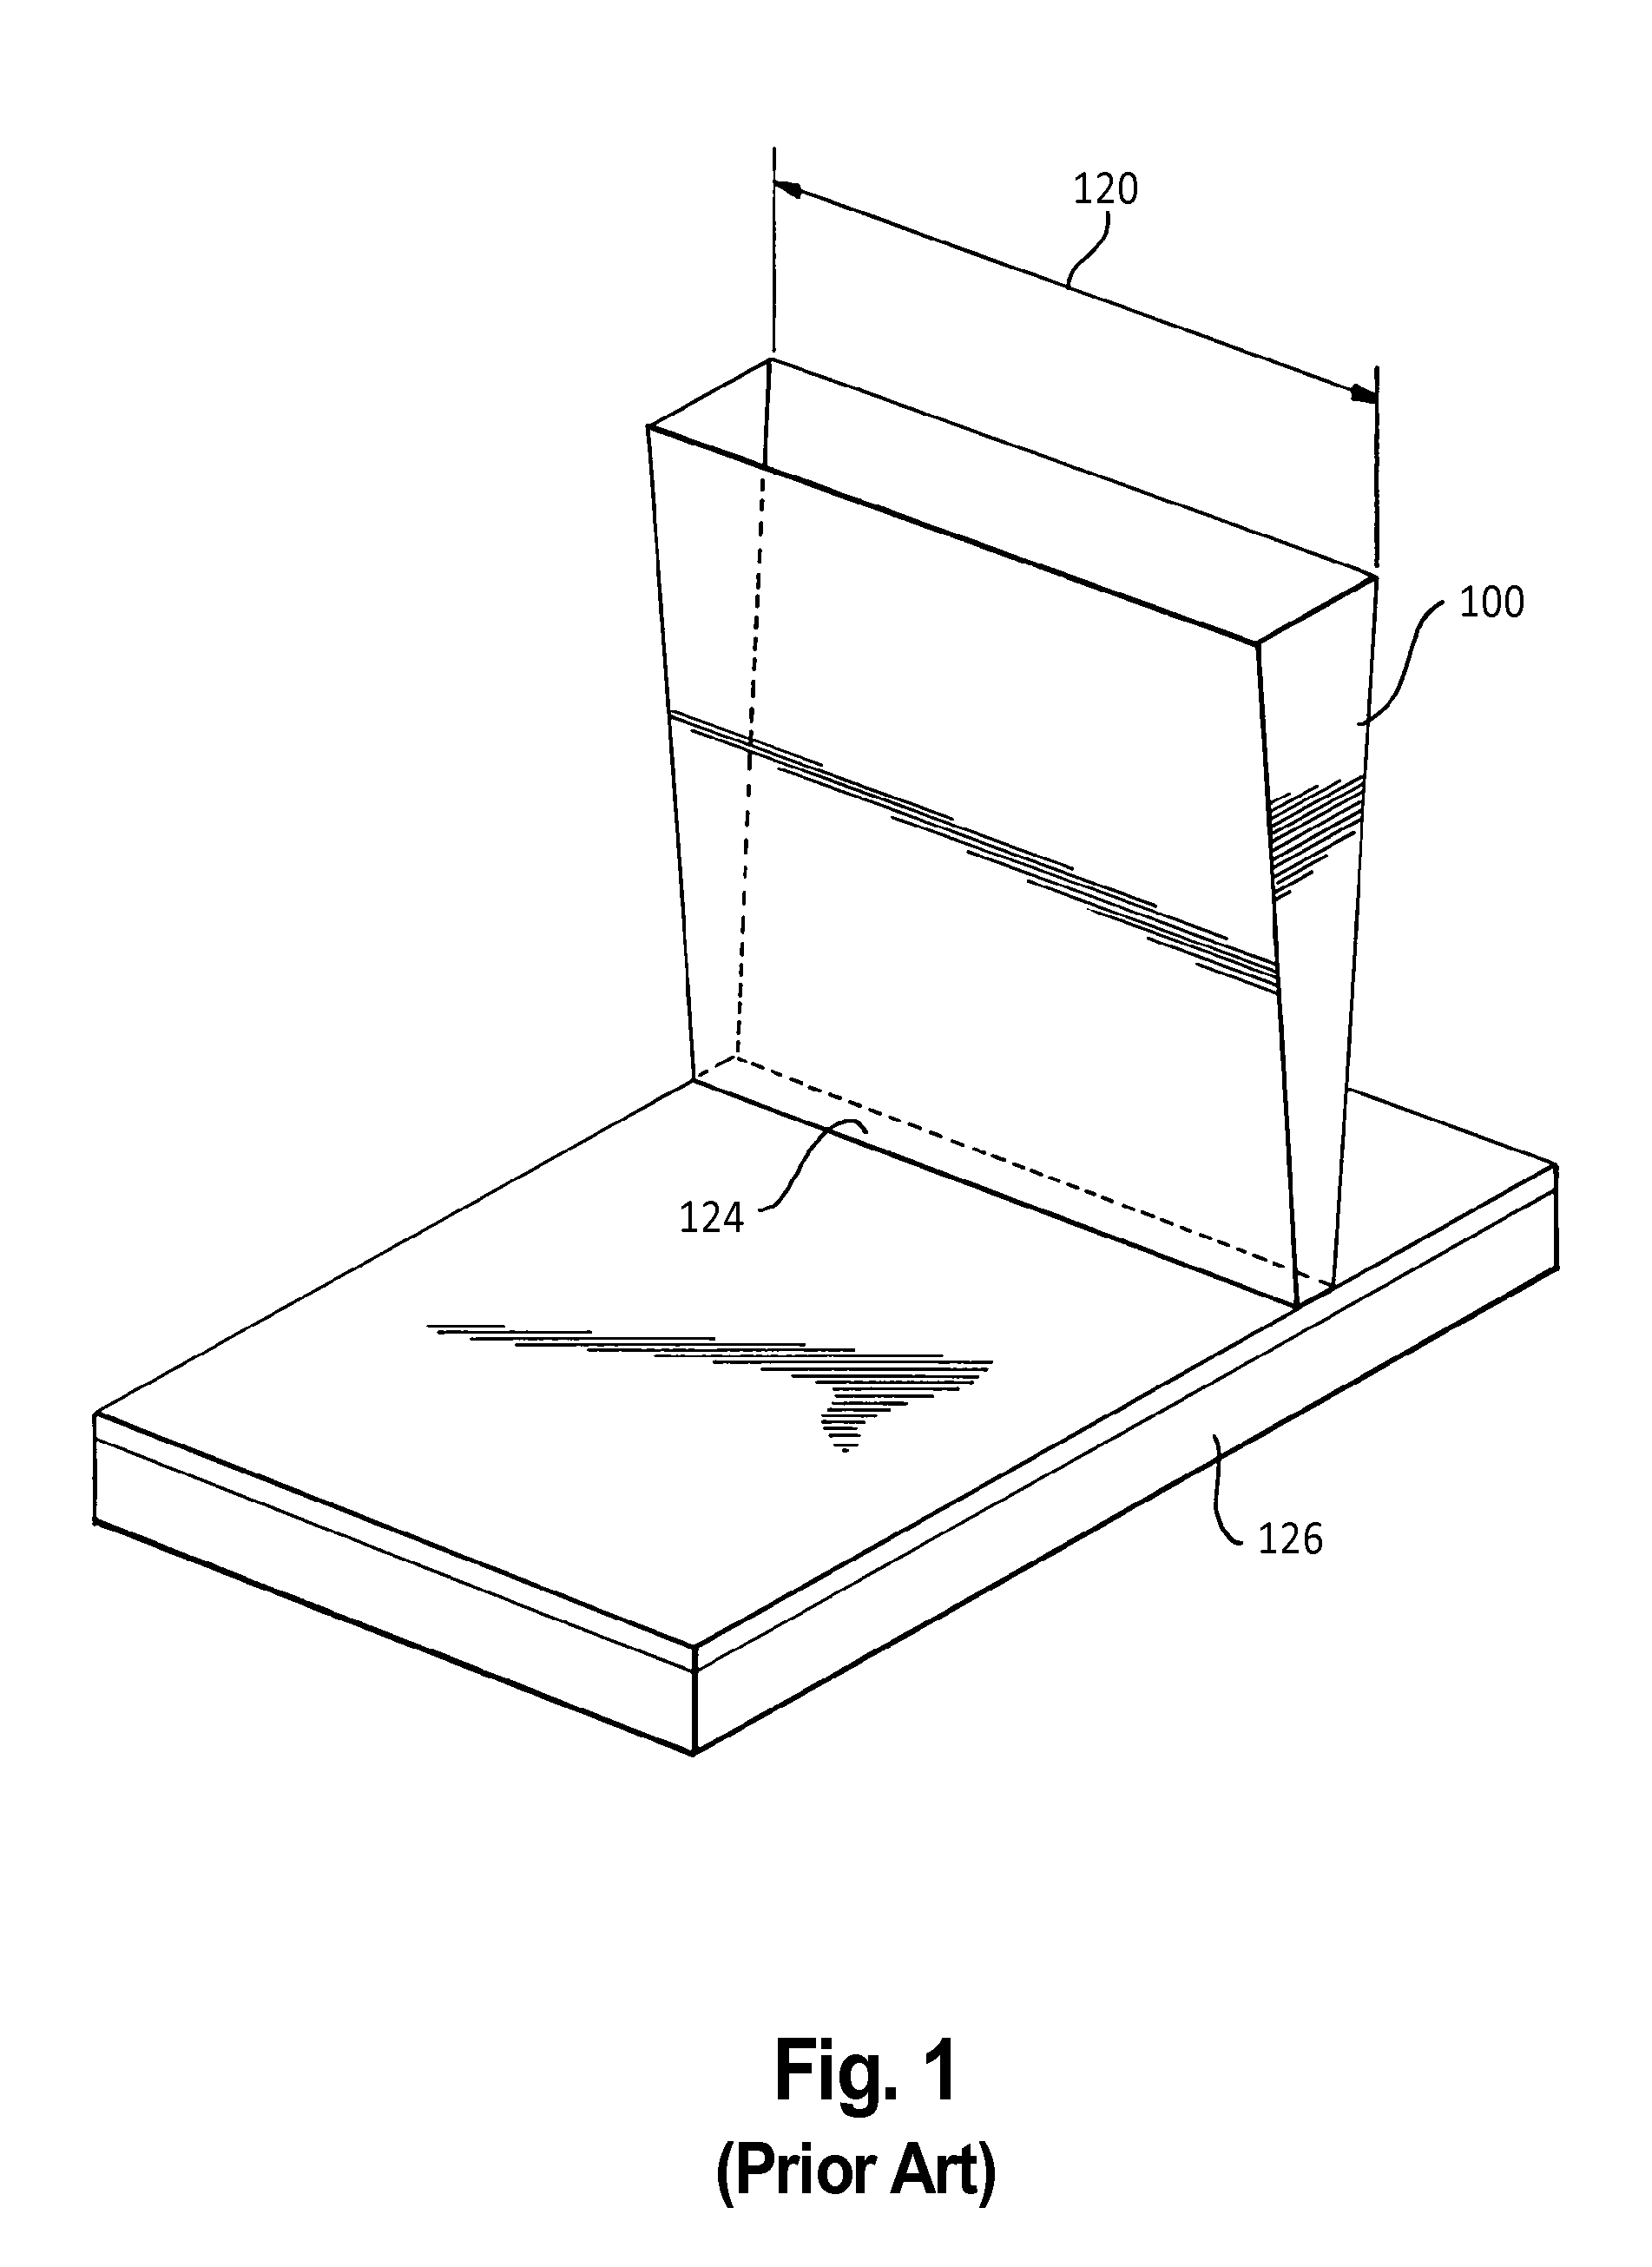 Systems and methods for processing thin films